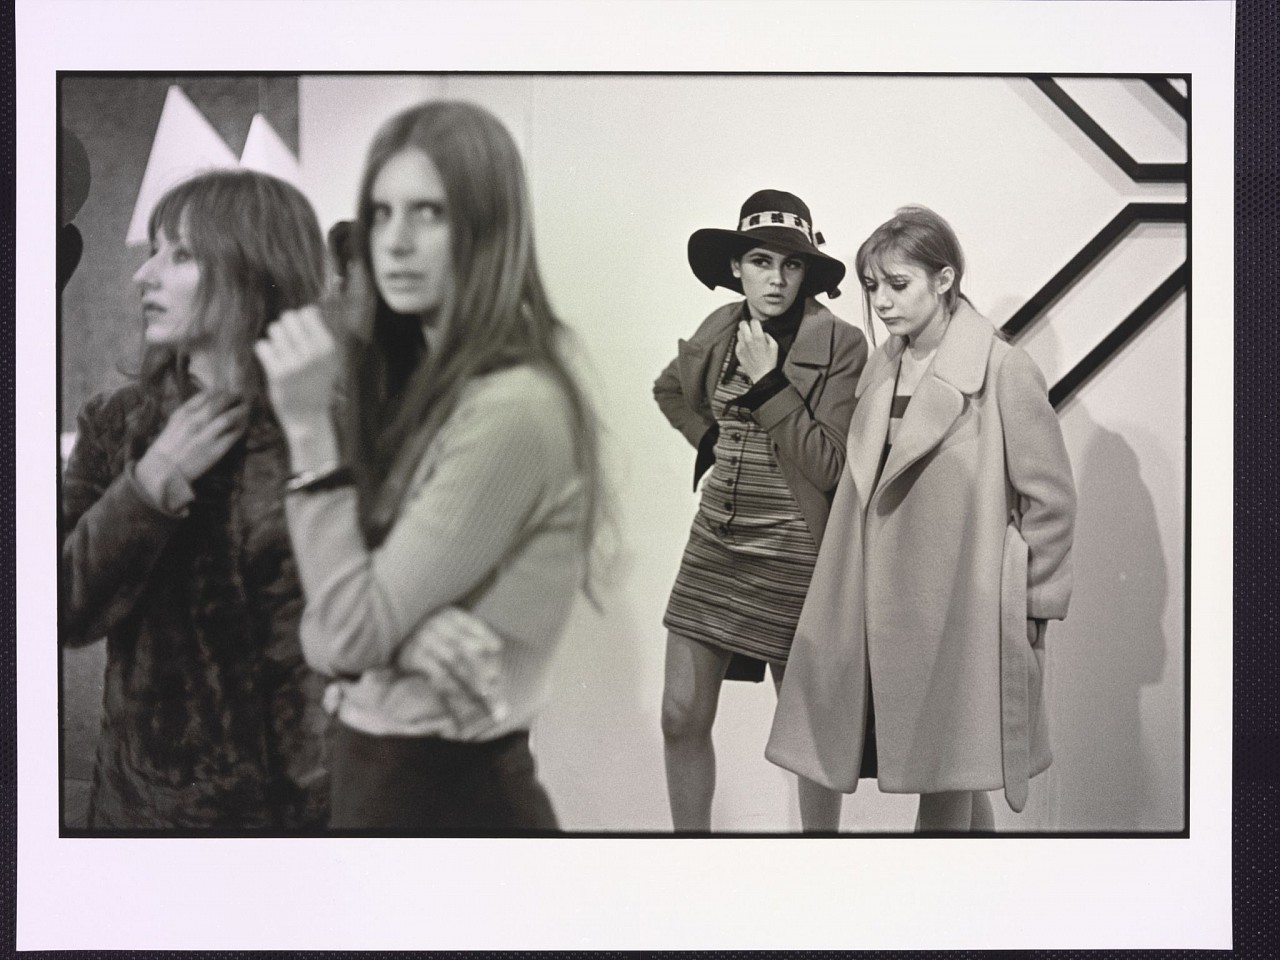 Danny LYON, Artists Pamela McGhan and Tamara Melchor at an opening, Park Place Gallery, 1967
Later gelatin silver print, 11 x 14 in.
2016.07.009
ADDITIONAL INFORMATION: Illustrated: Danny Lyon, The Seventh Dog (New York, The Phaidon Press, 2014), p. 150
Credit Line: Lafayette College Art Collection, Easton, PA; Gift of Bennett ('79) and Meg Goodman